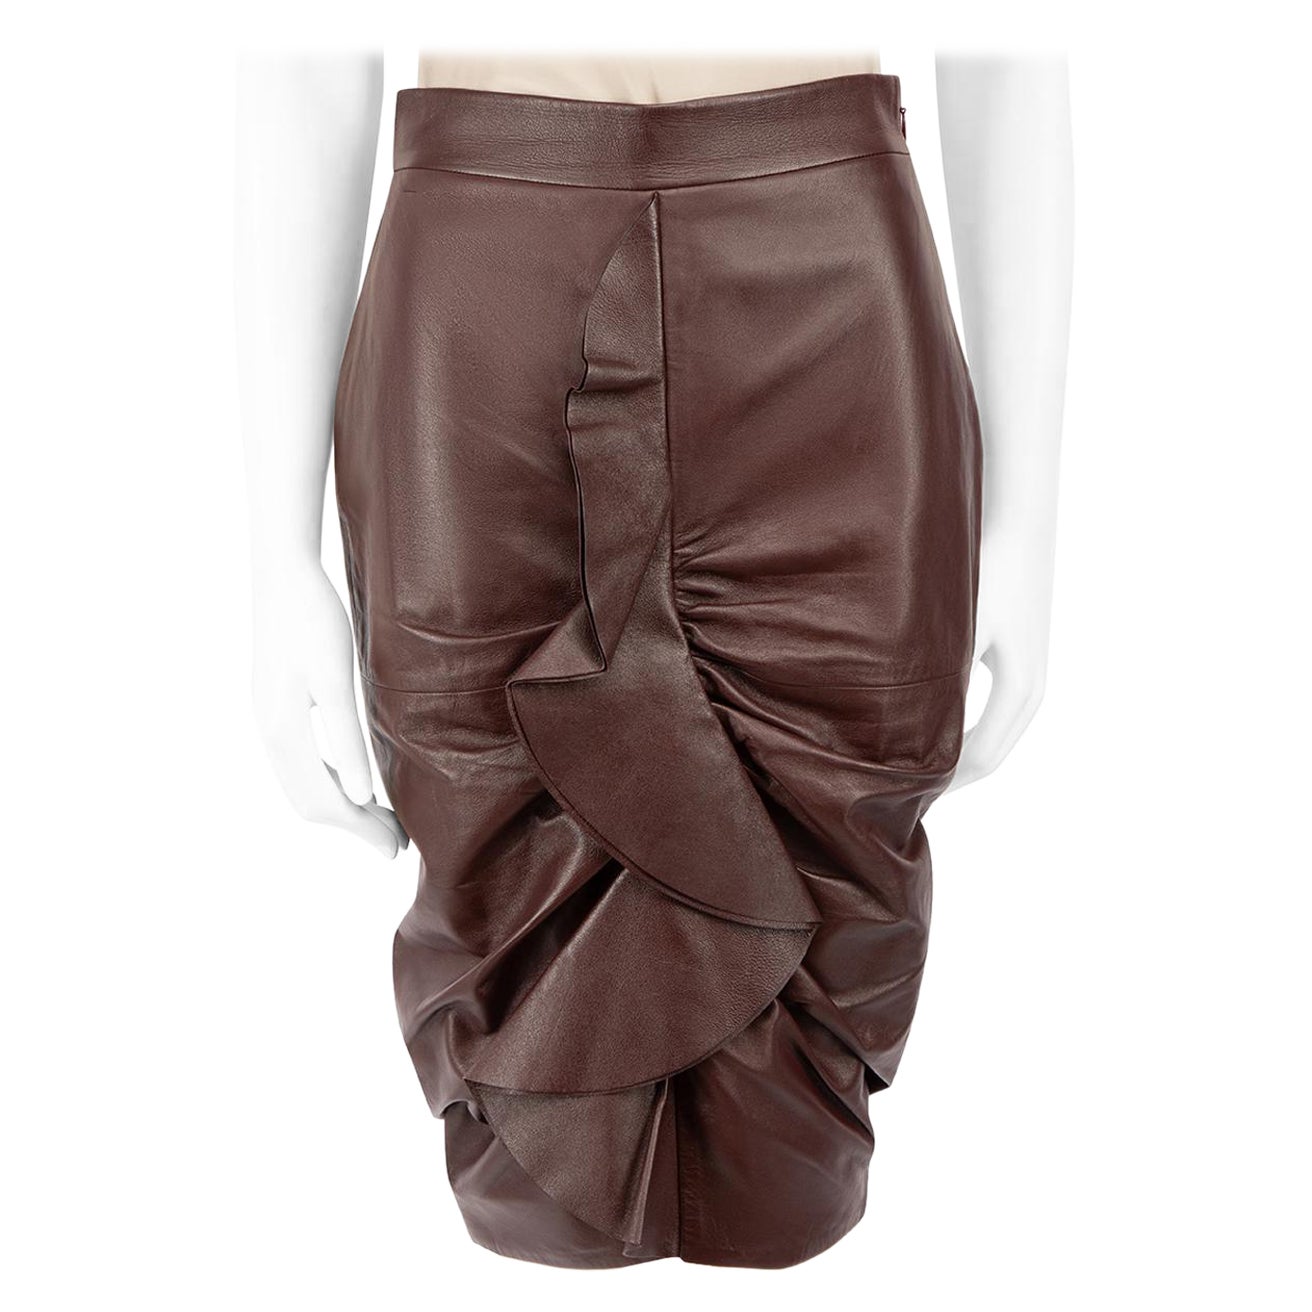 Givenchy Brown Leather Ruffle Accent Skirt Size M